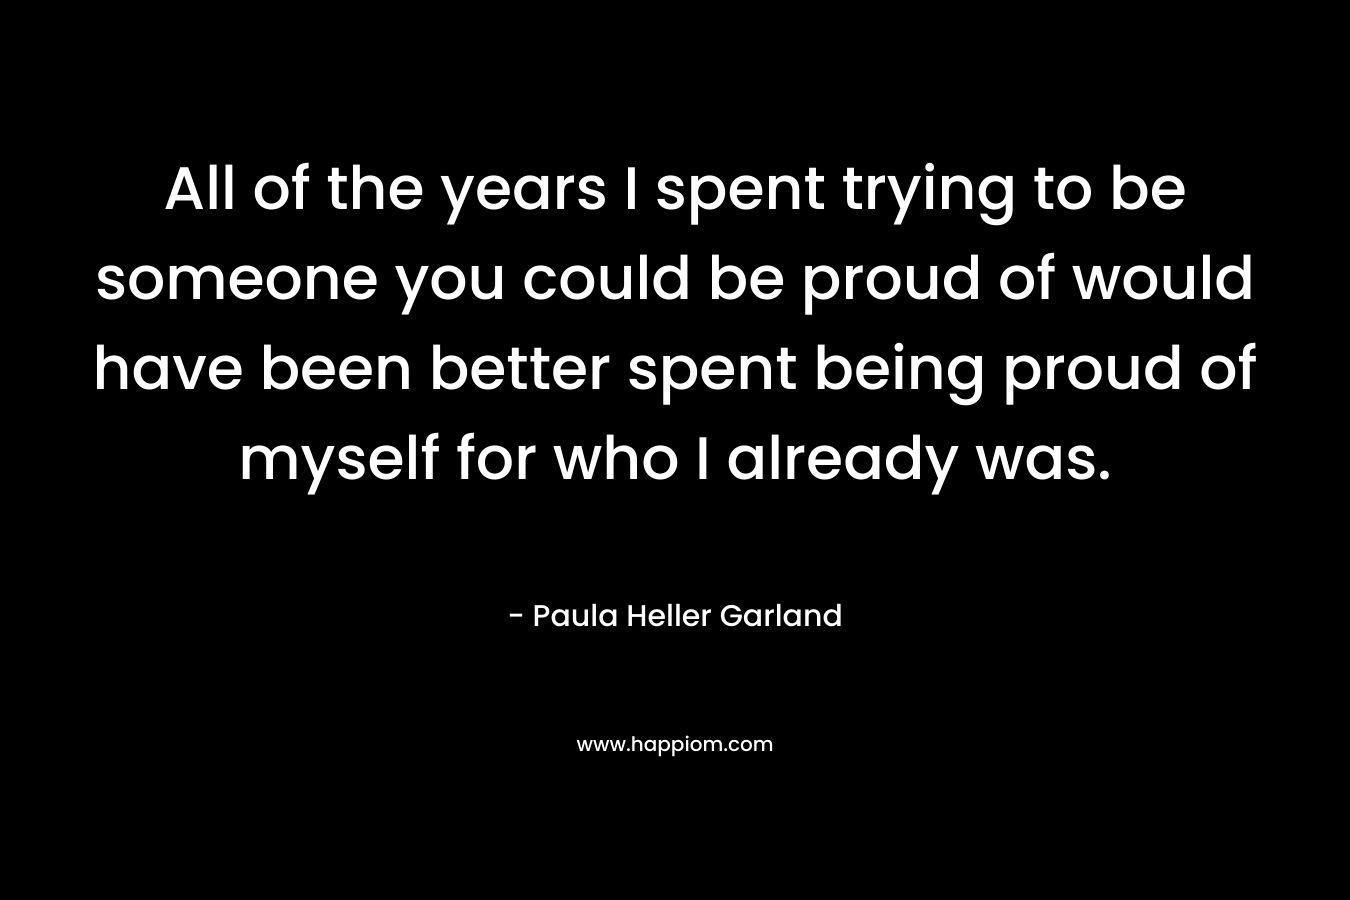 All of the years I spent trying to be someone you could be proud of would have been better spent being proud of myself for who I already was.